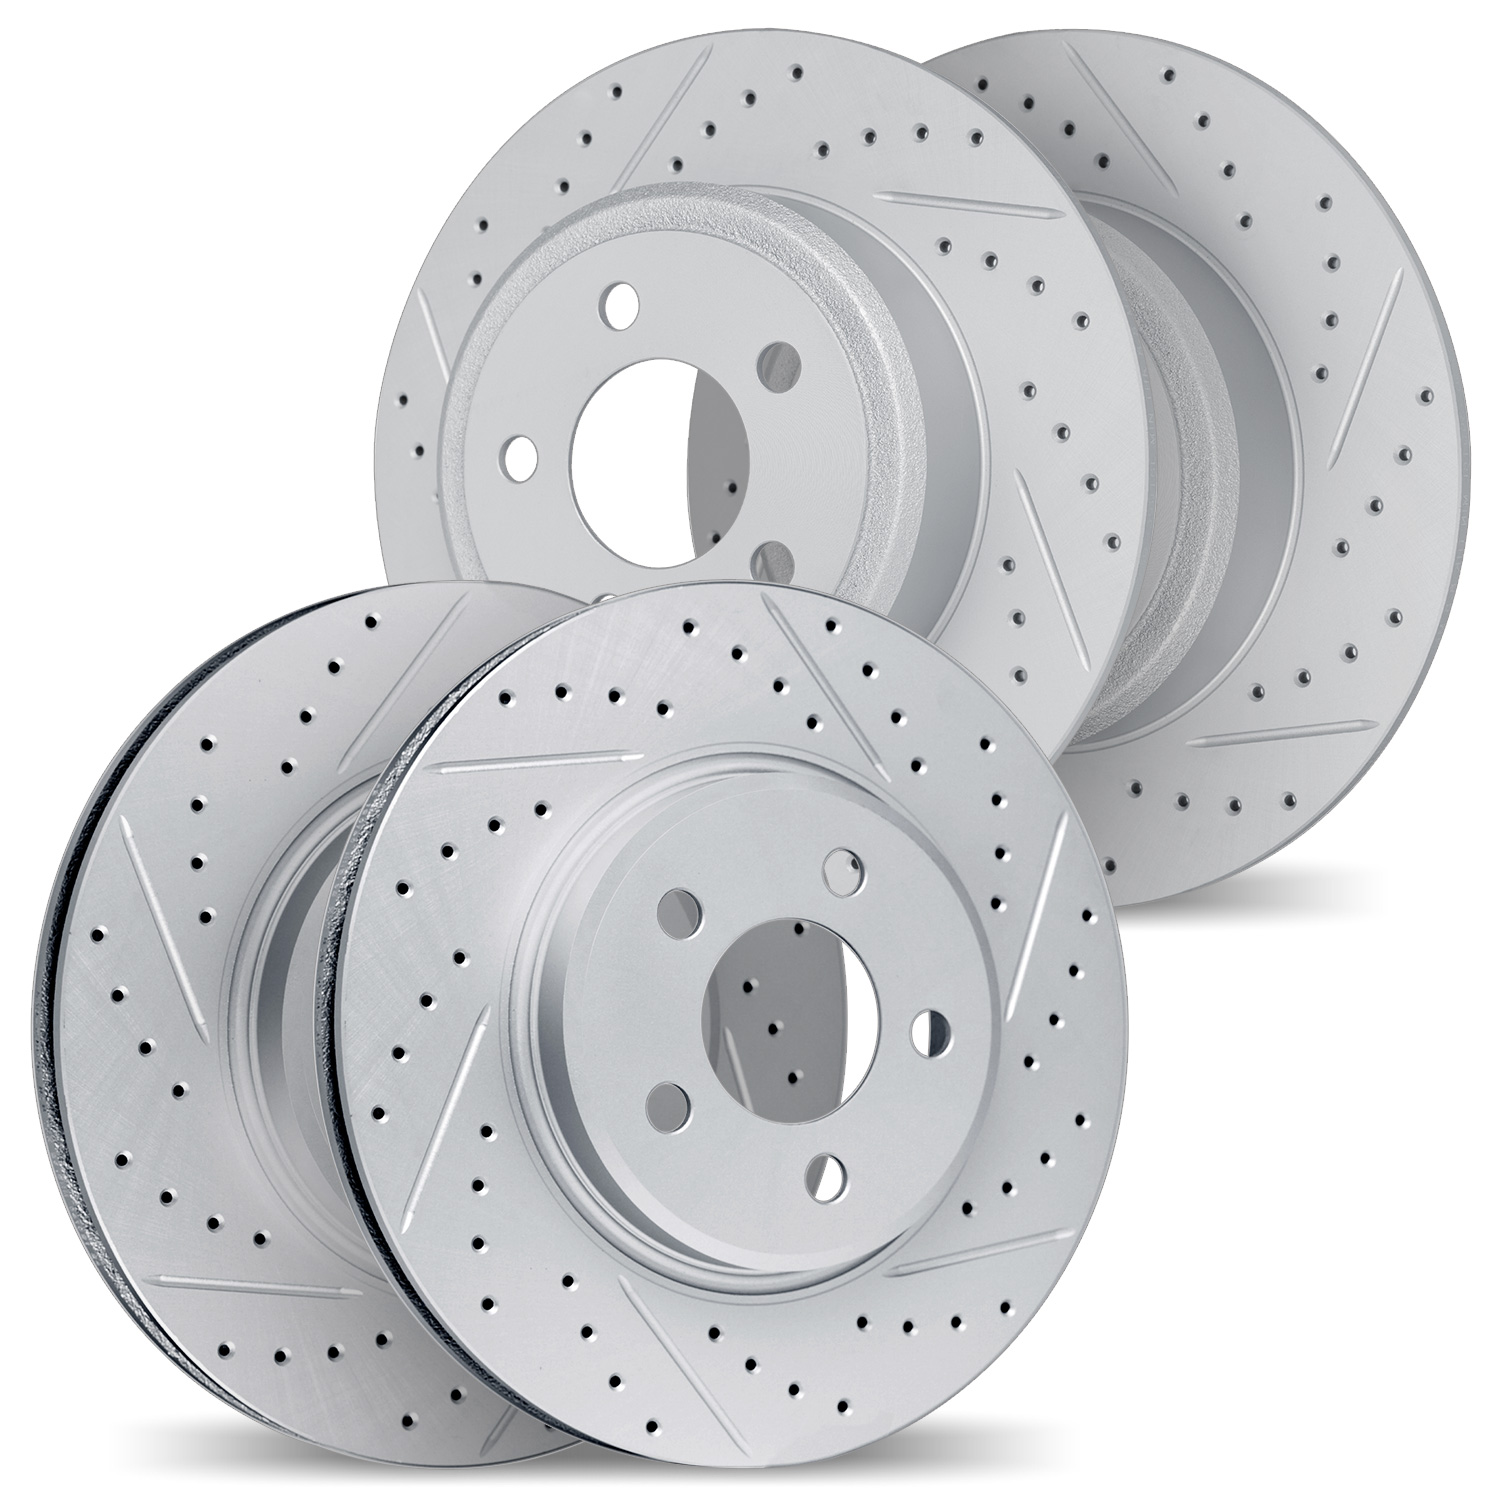 2004-59014 Geoperformance Drilled/Slotted Brake Rotors, 2007-2016 Acura/Honda, Position: Front and Rear